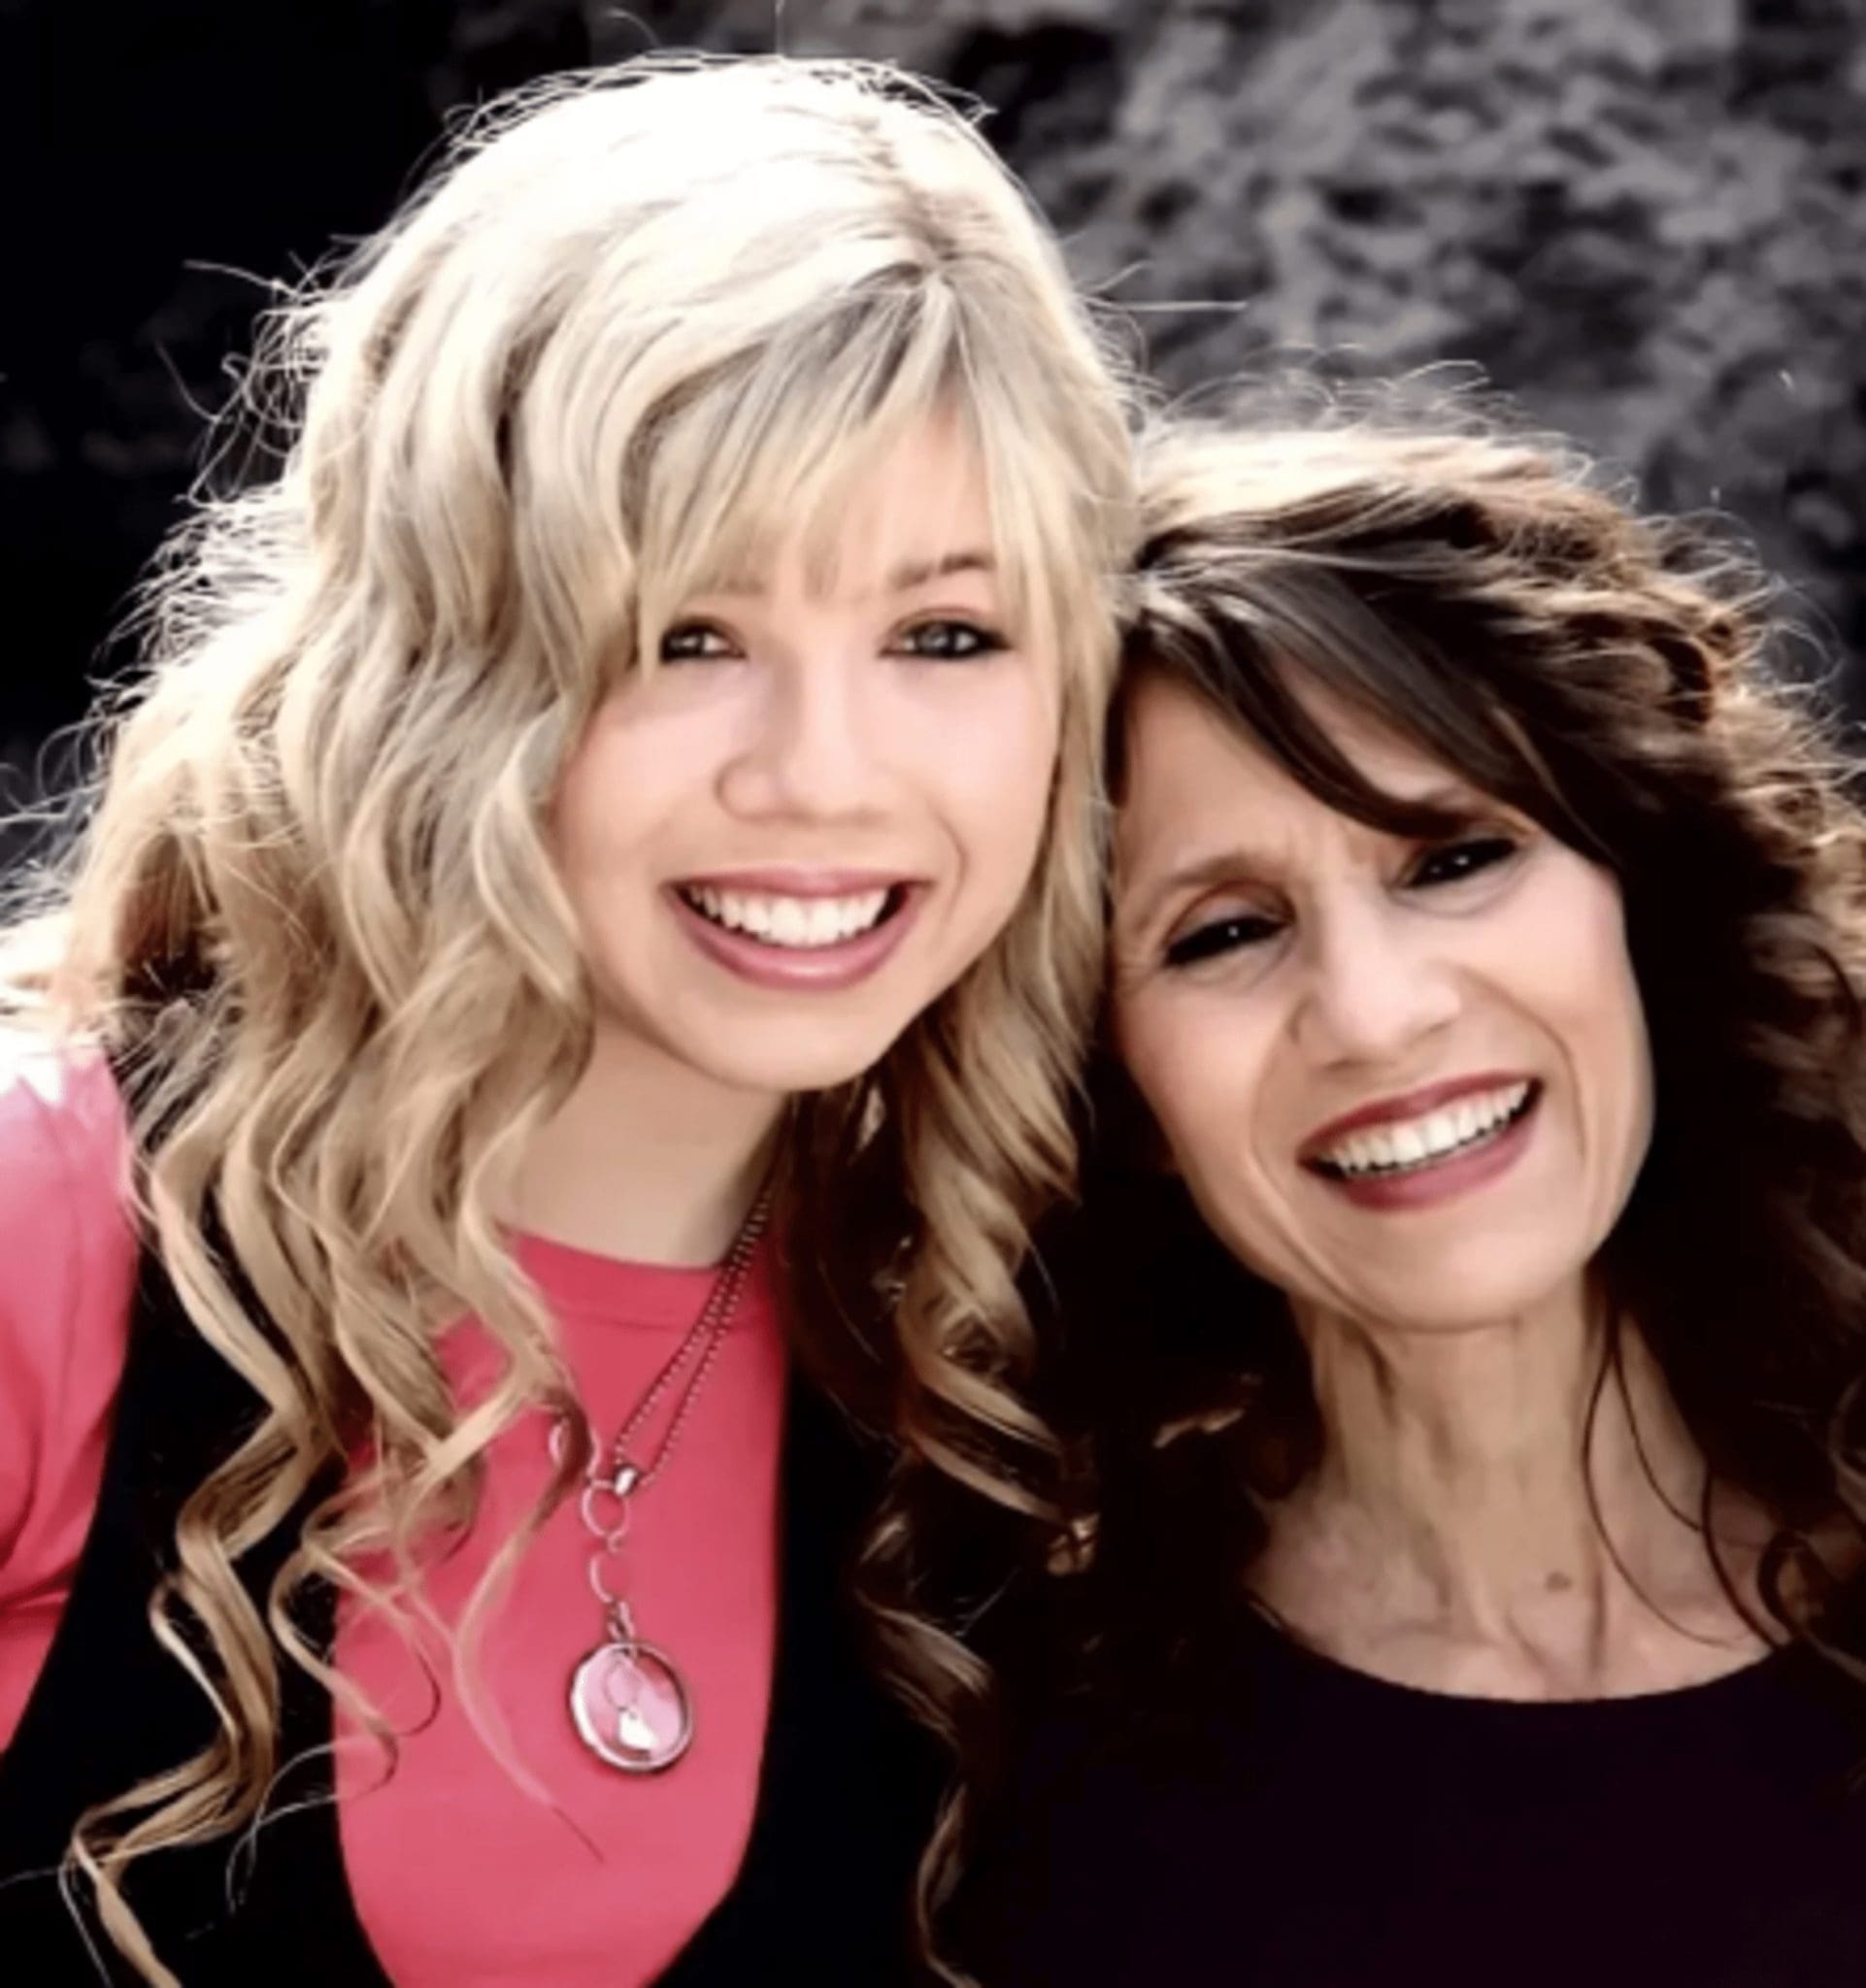 Jennette McCurdy Alleged That Debbie McCurdy, Her Deceased Mother, Would Force Her And Her Brother To Take Showers Together.